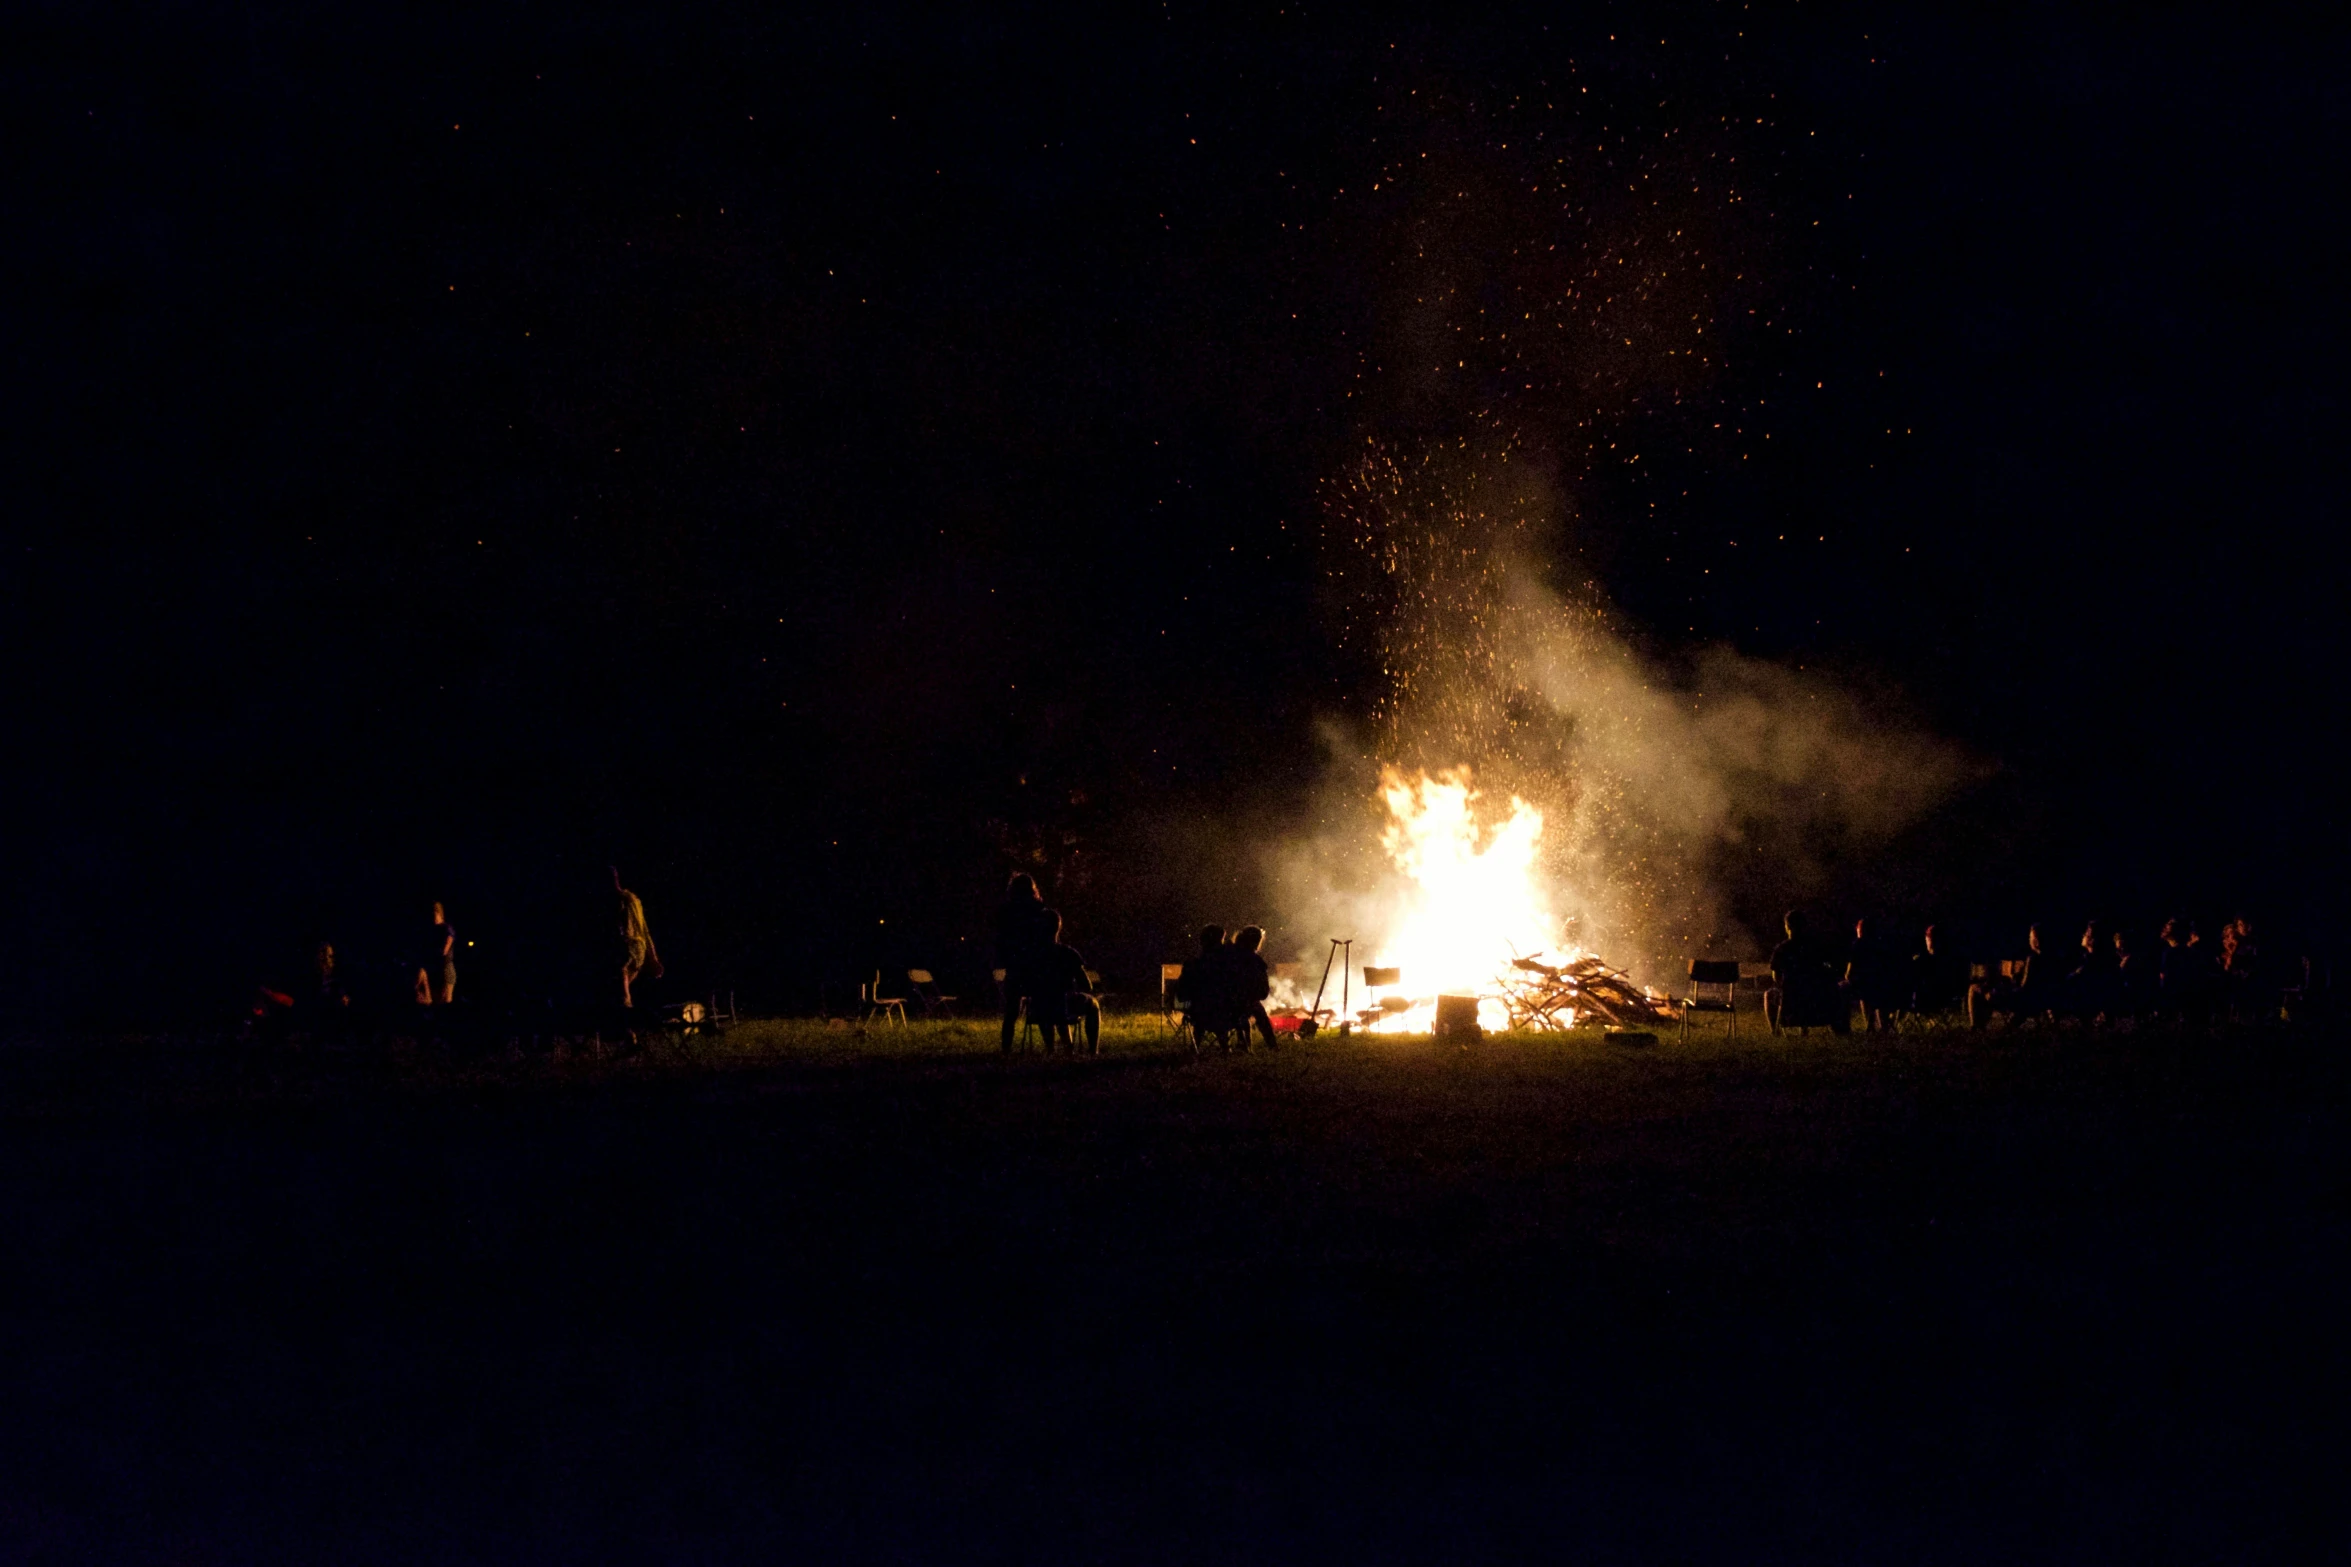 people gather around a bonfire at night with their picture lit